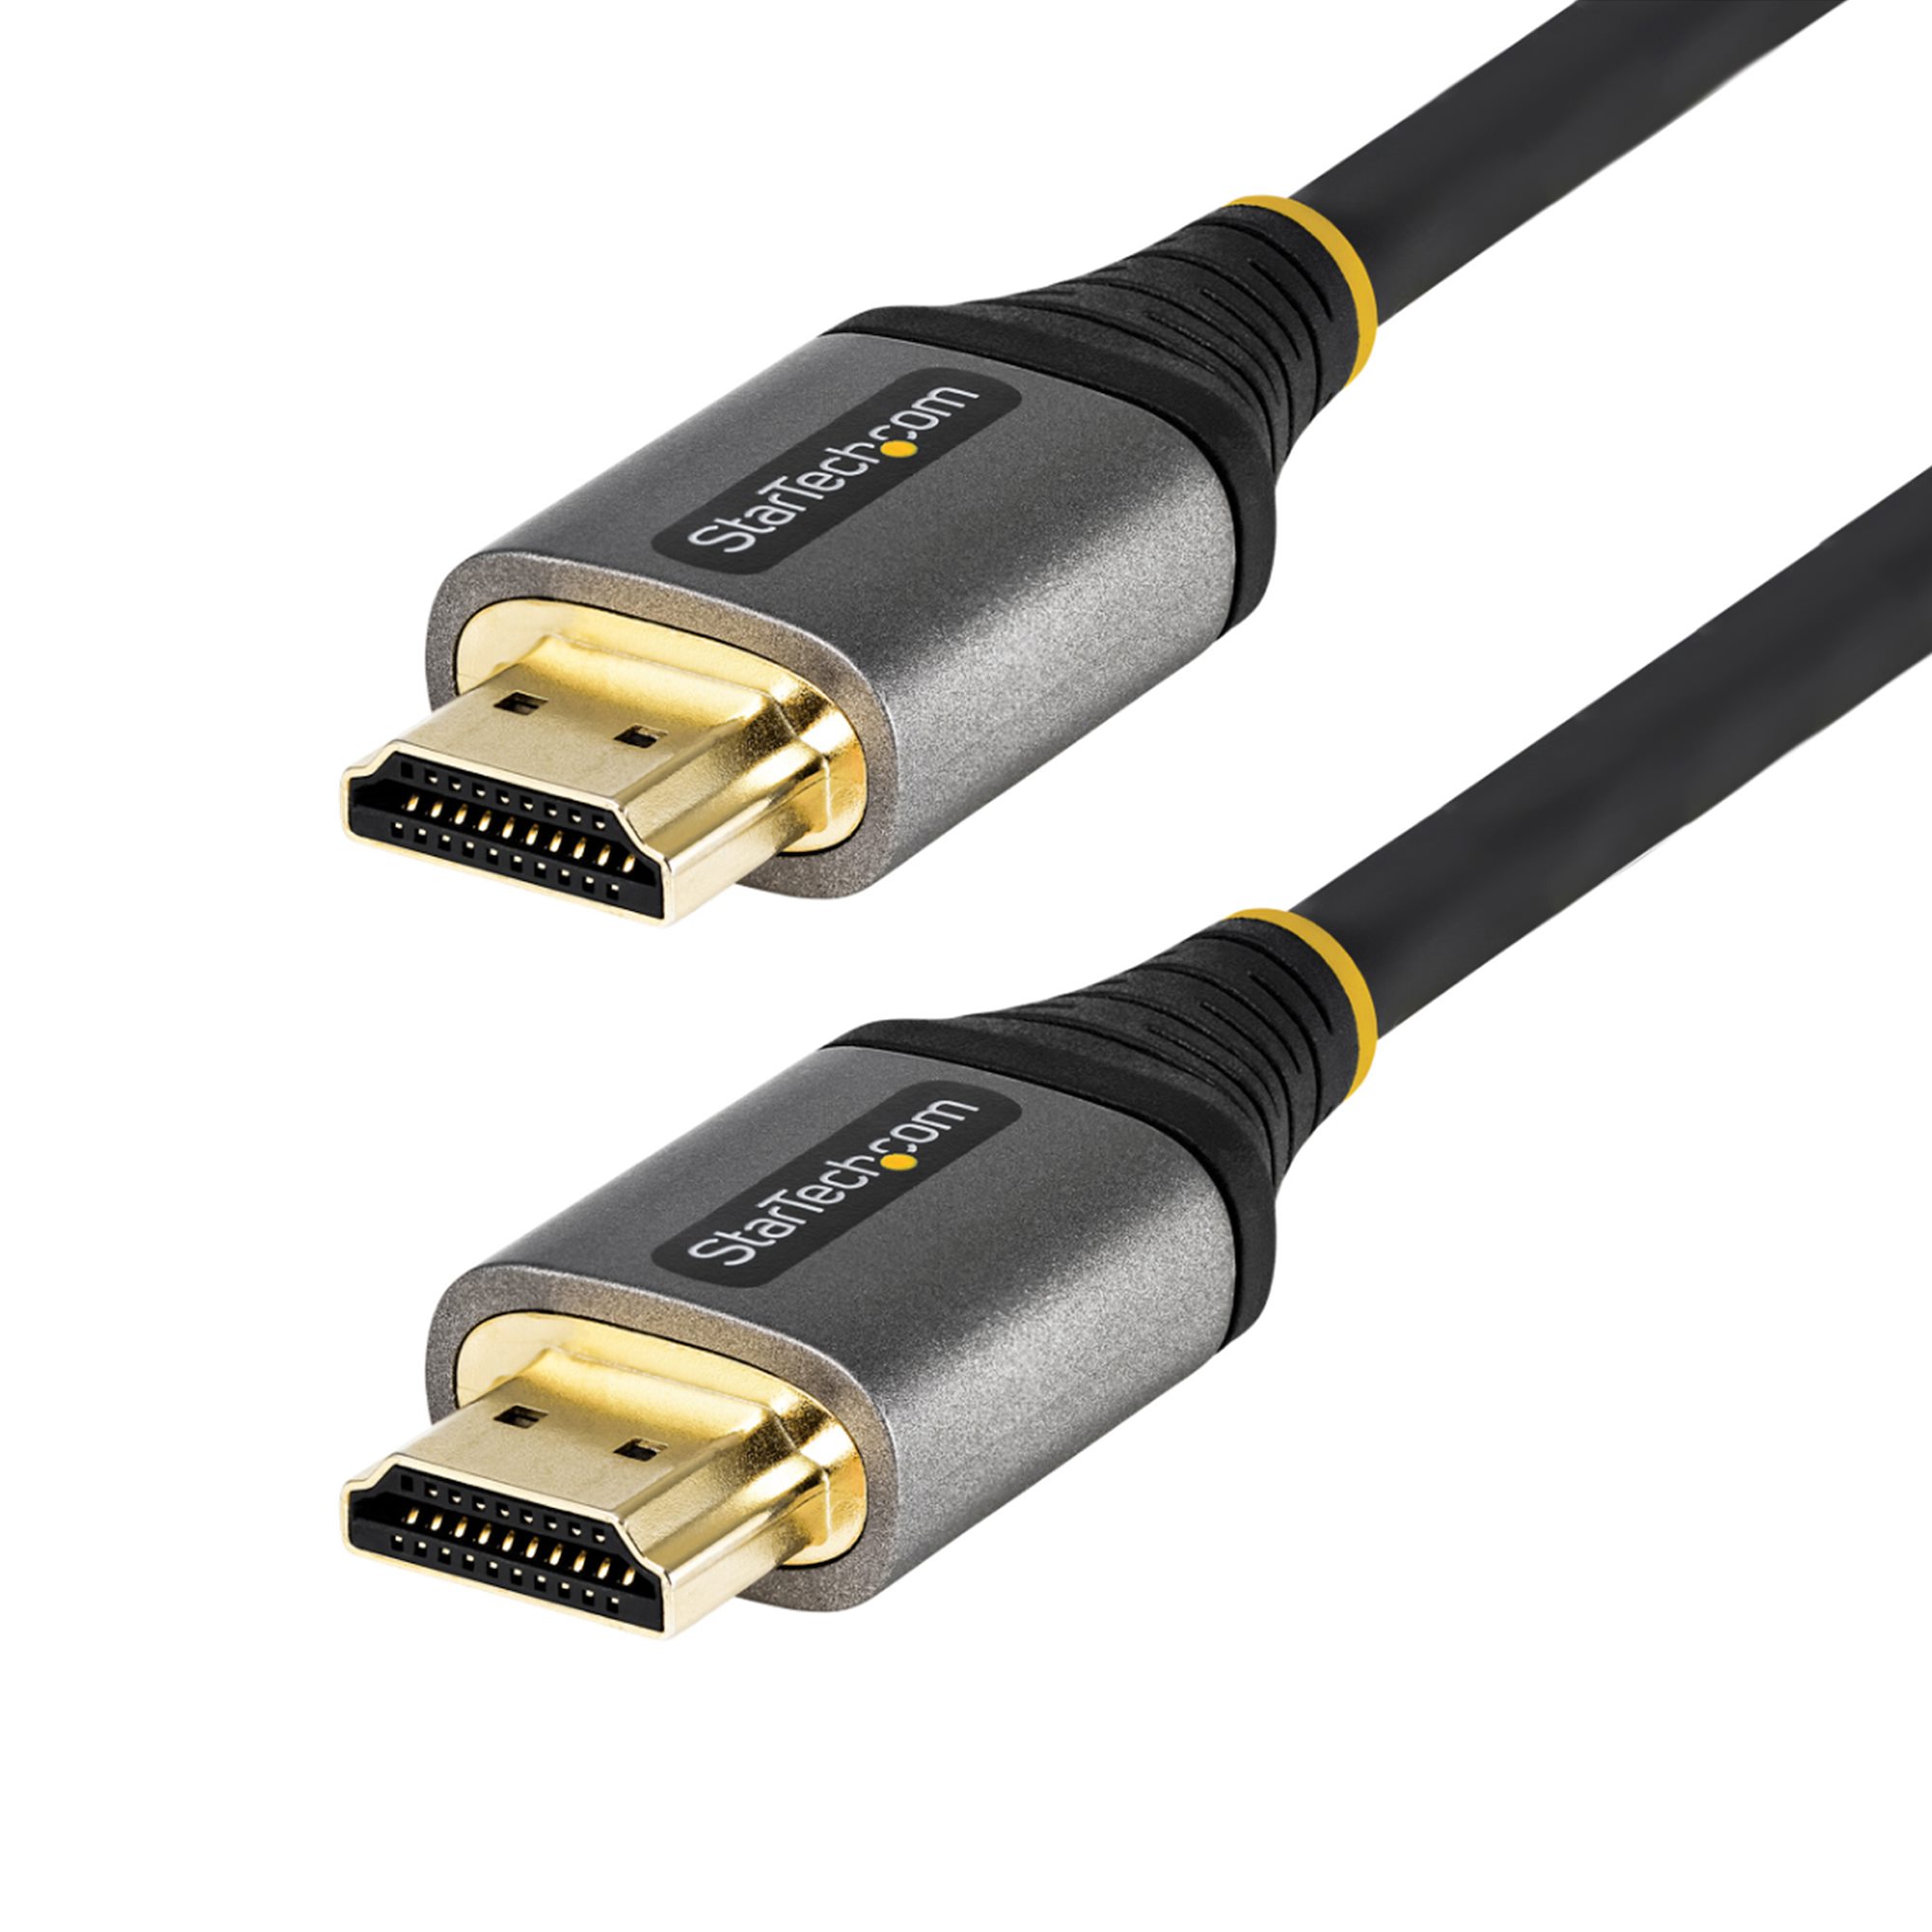 Premium HDTV Gold Plated 48Gbps 8K 60HZ 4K 120HZ HDMI-compatible 2.1 Cable  Digital Cord HDR 5M 